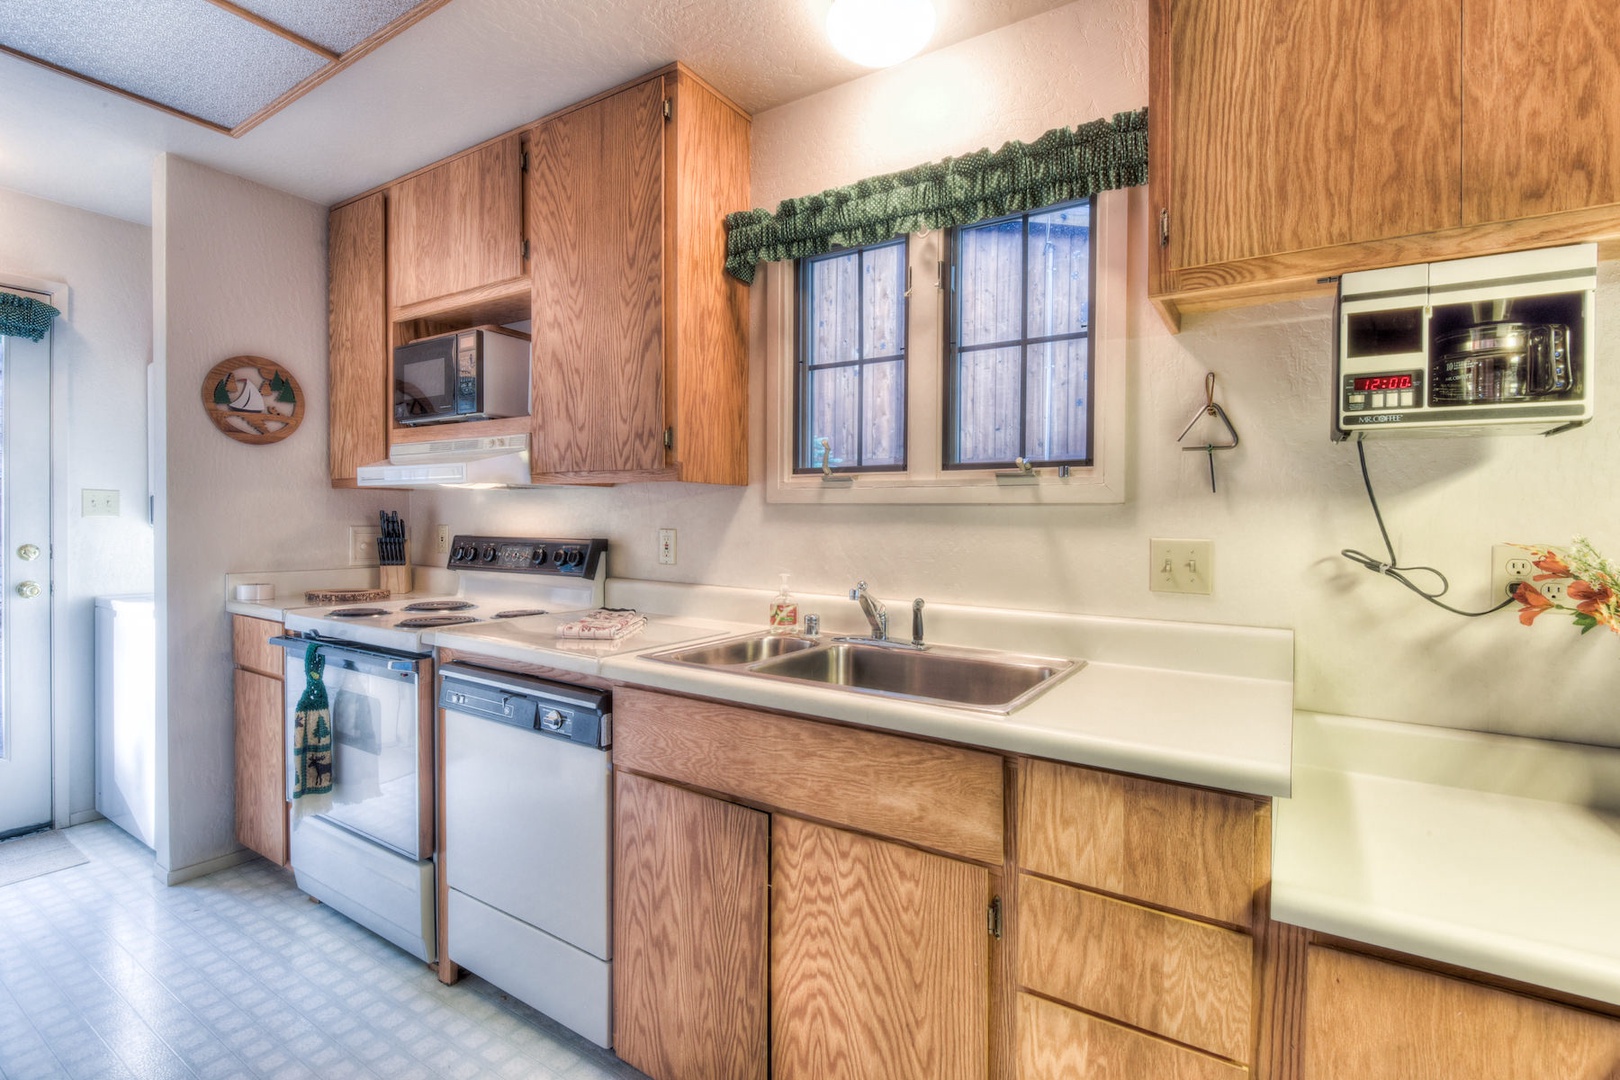 Full kitchen w/ toaster, drip coffee maker, blender, and more!